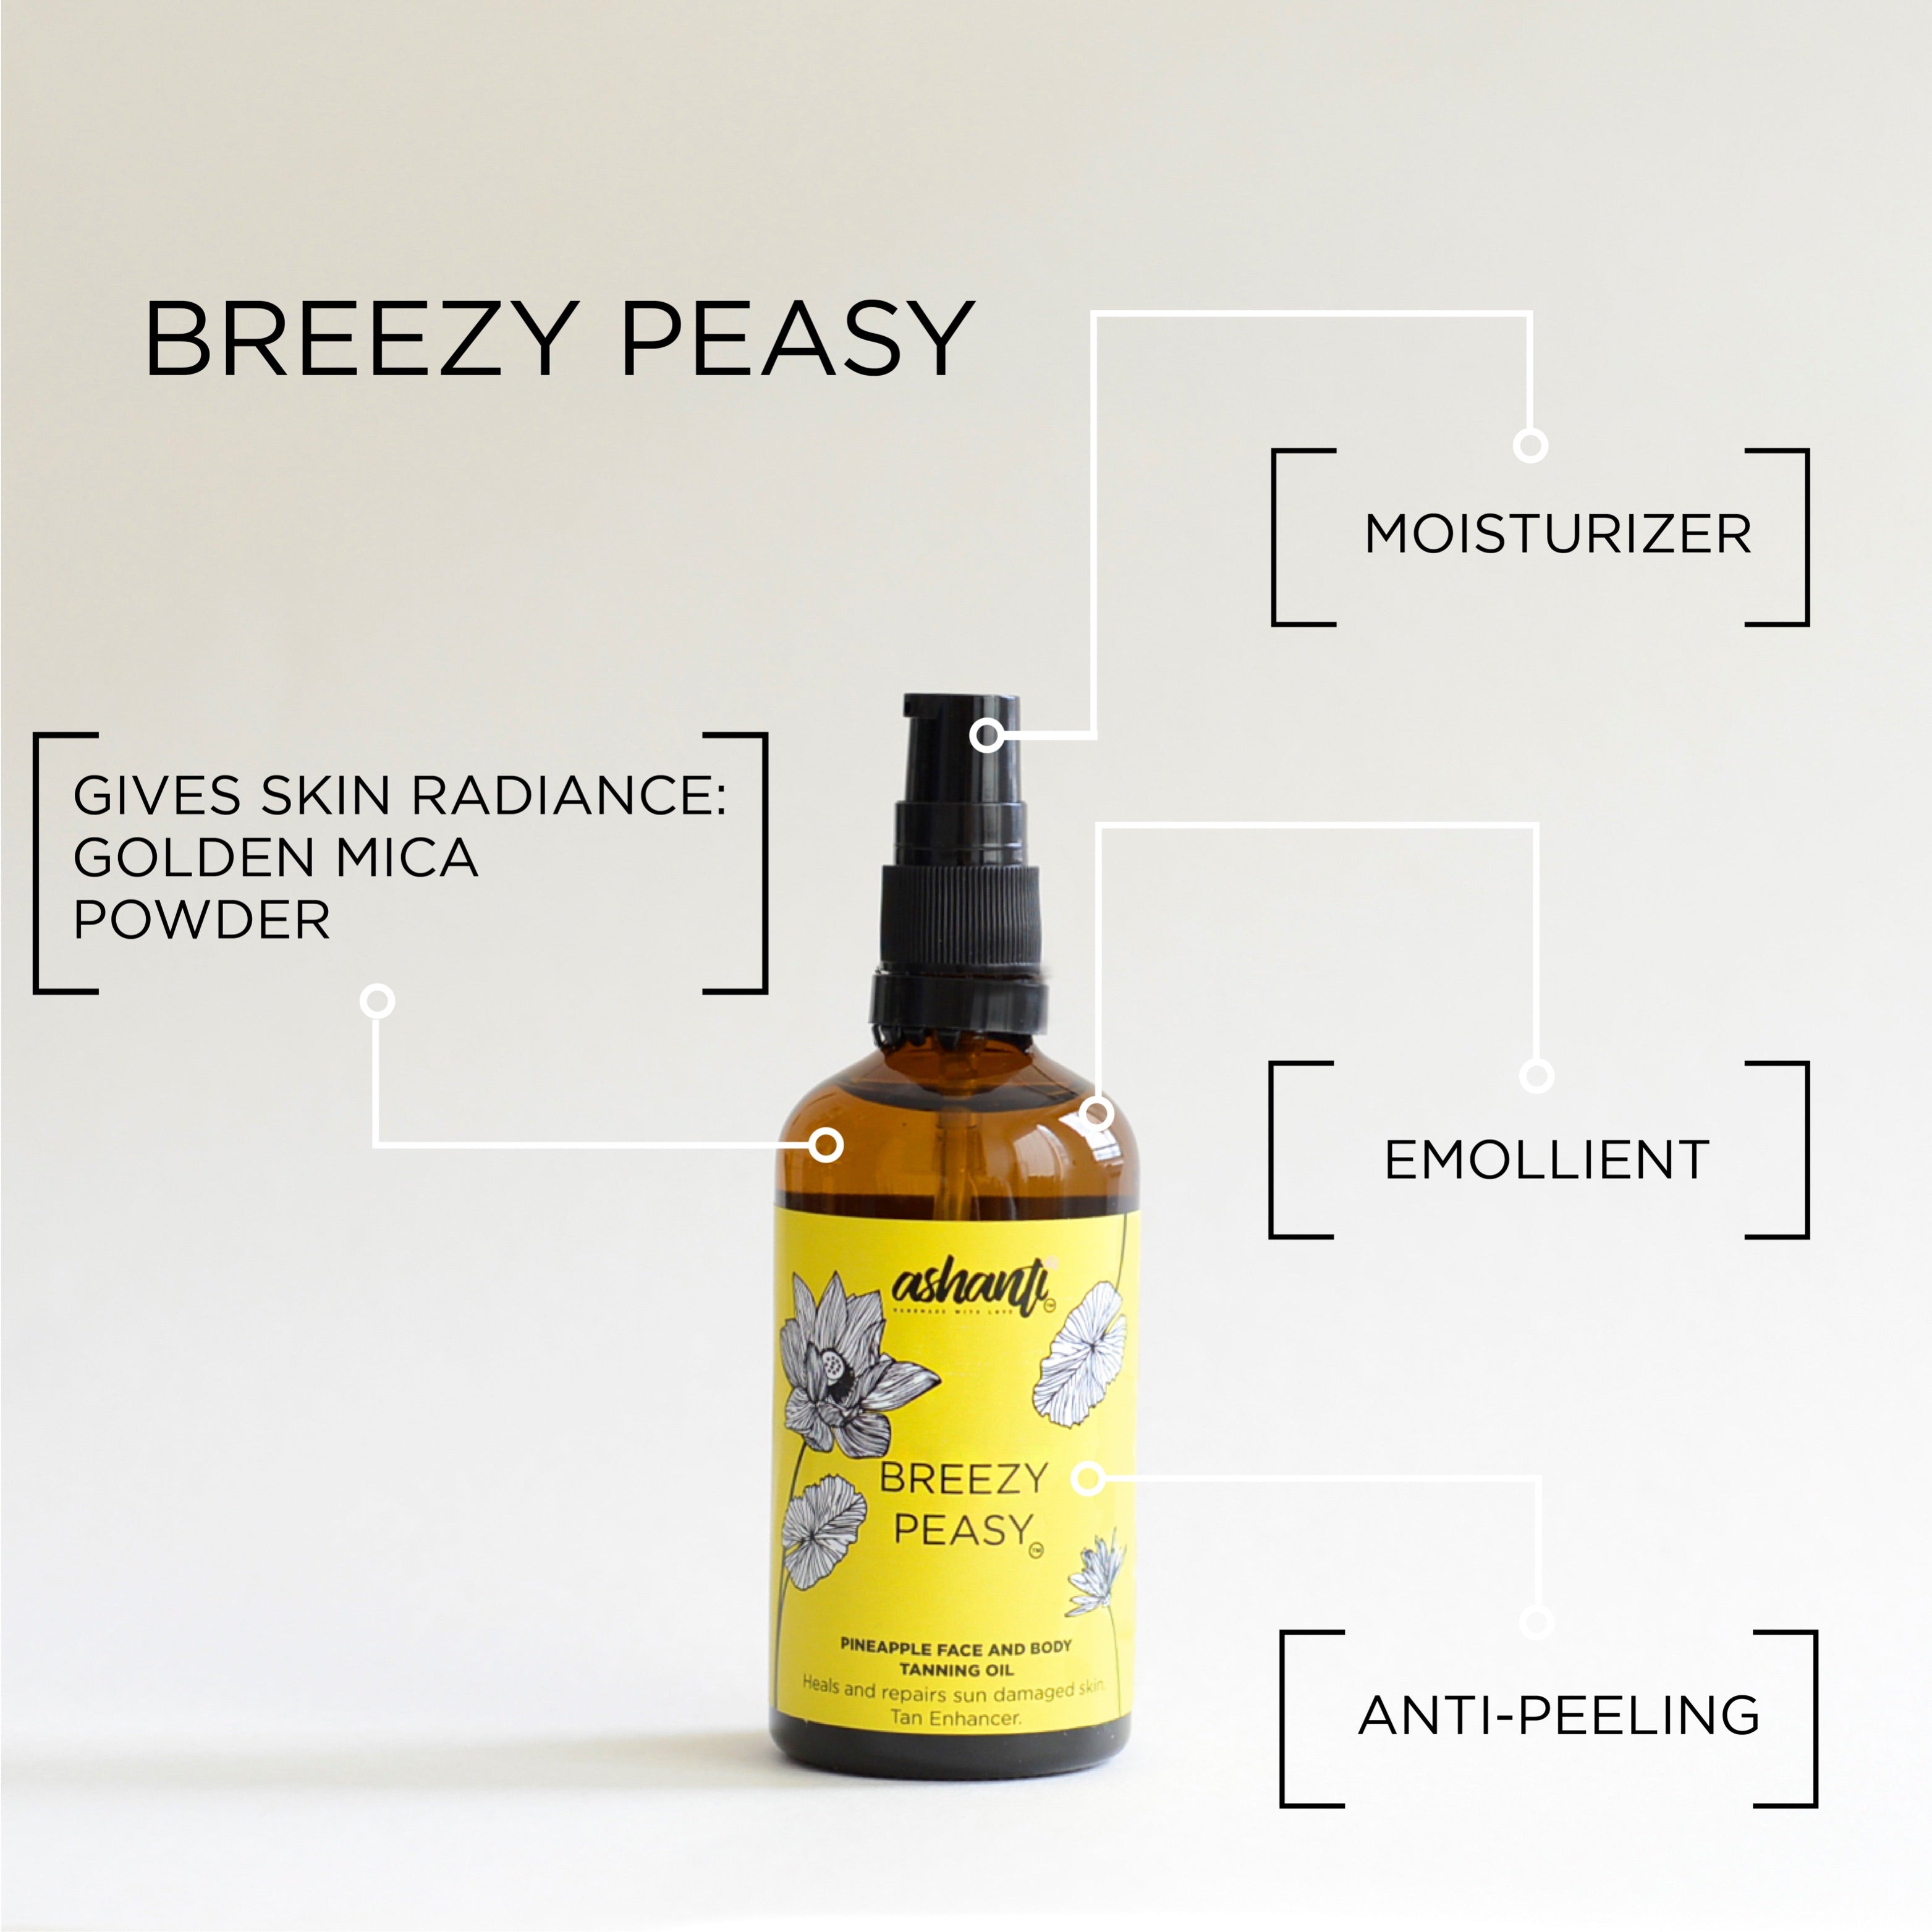 BREEZY PEASY! - PINEAPPLE FACE AND BODY TANNING OIL